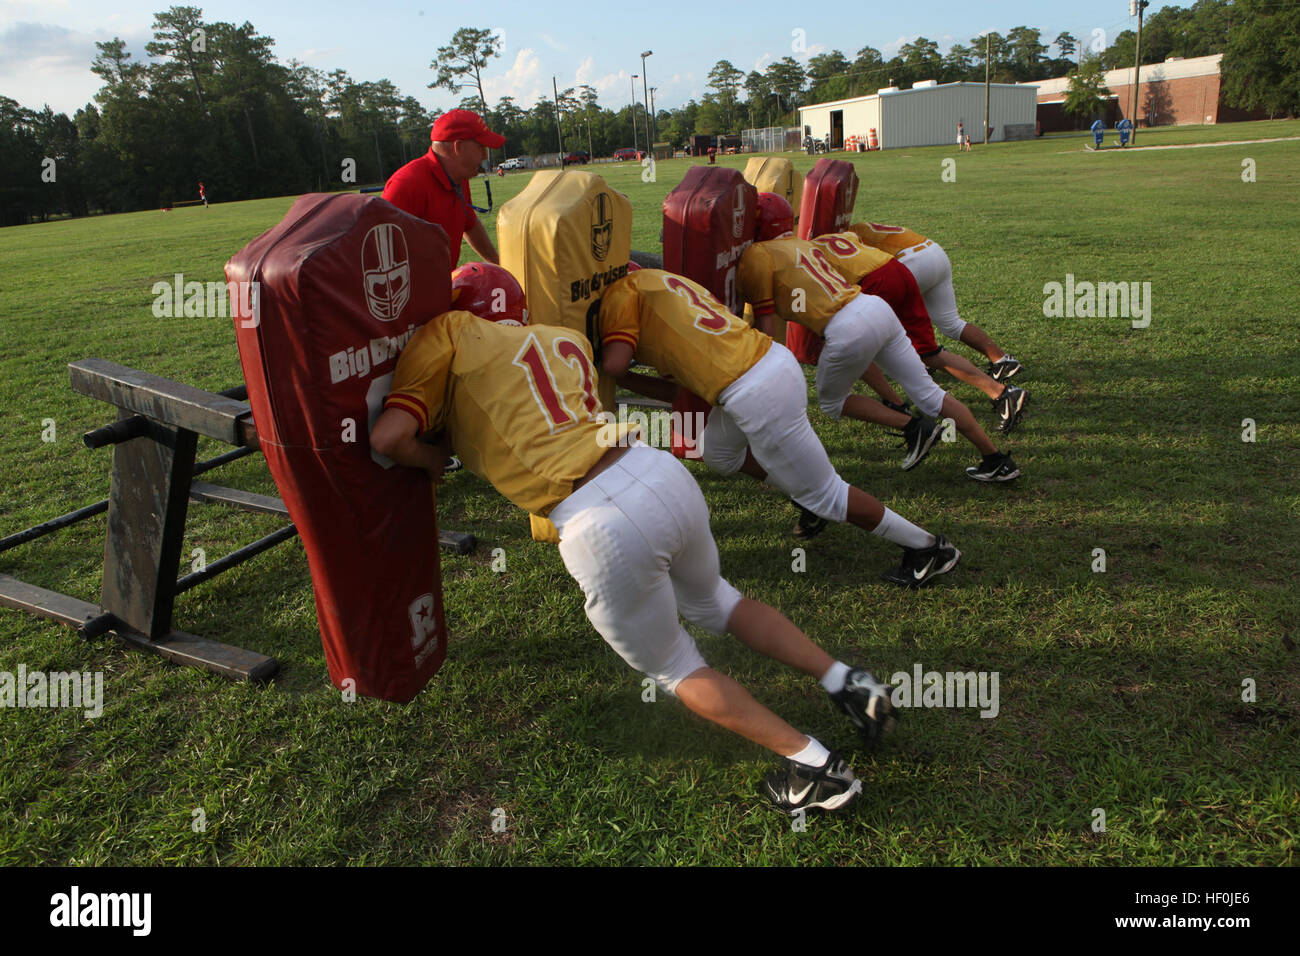 Lejeune High School assistant football coach Mike Gardner practices Big Bruiser drills with his football players, Aug. 10, during practice behind LHS aboard Marine Corps Base Camp Lejeune. The Lejeune High School football team has set high expectations for this season and plan on going above .500 for the first time in nearly six years. Lejeune High School Devil Pups football team sets high expectations 110817-M-TM193-001 Stock Photo